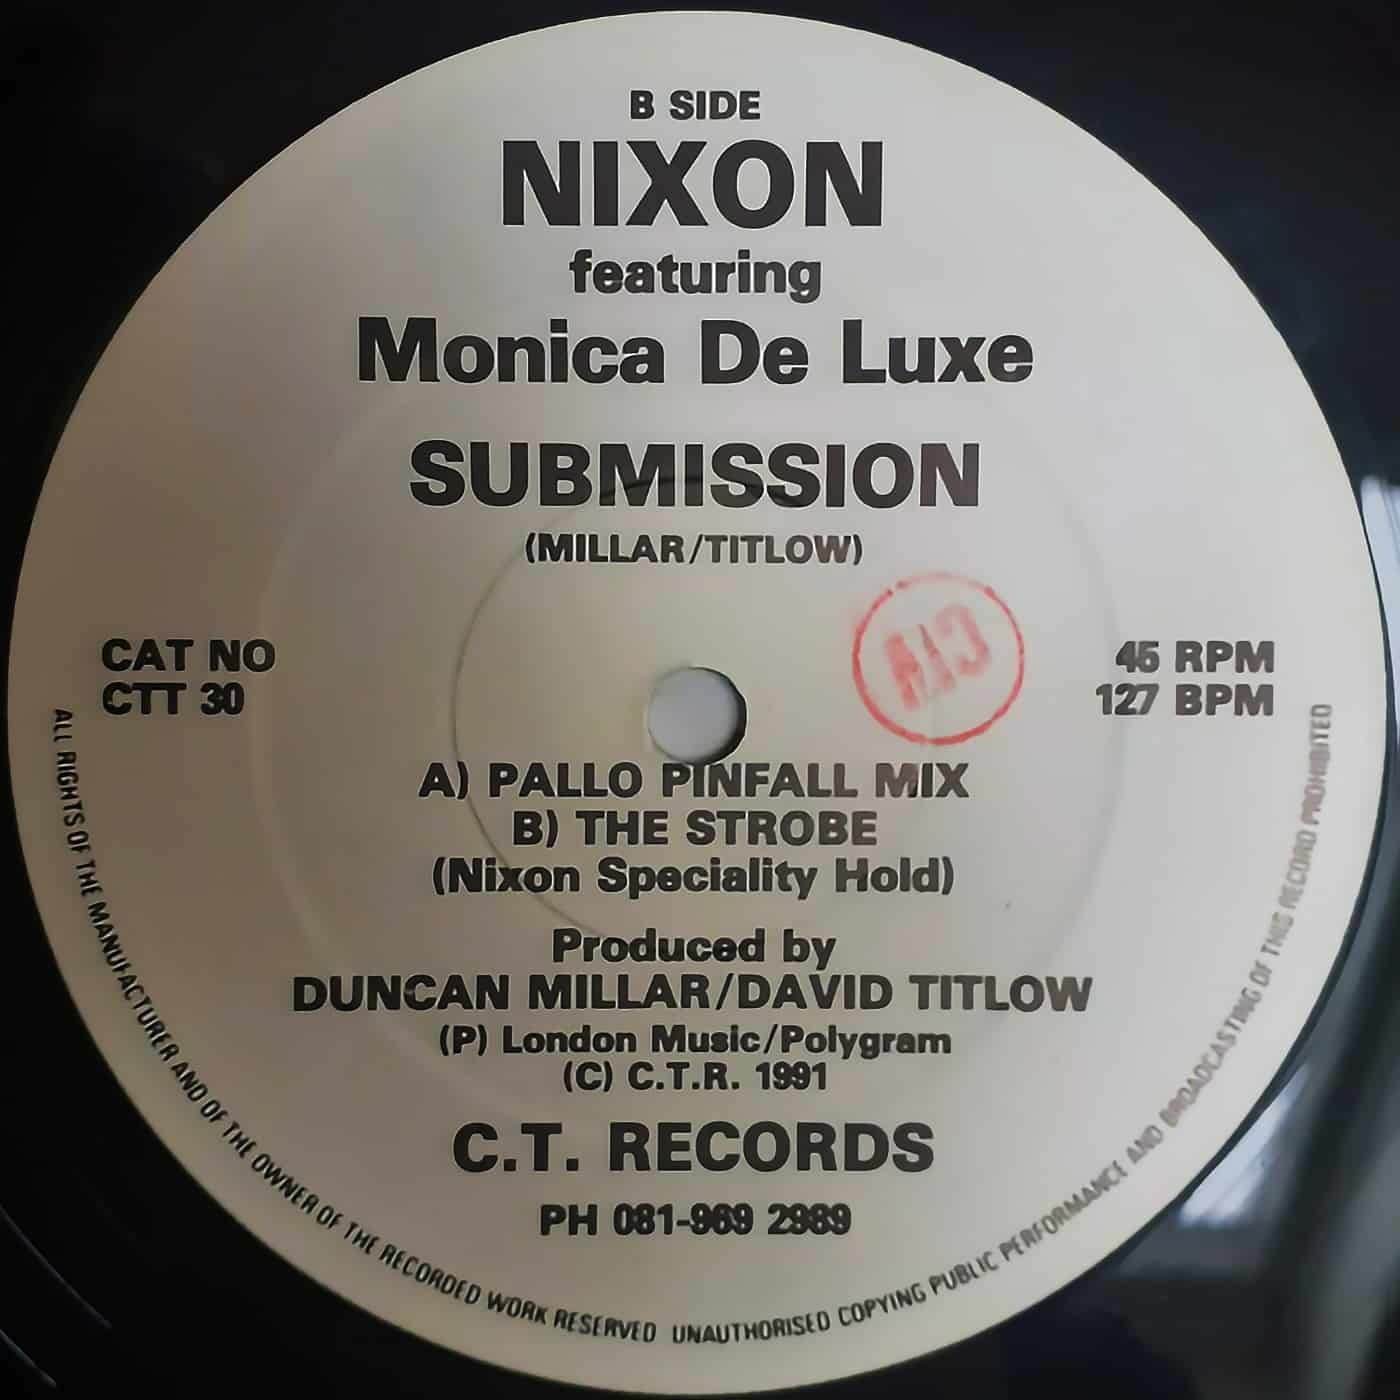 image cover: Nixon Featuring Monica De Luxe - Submission / CTT 30